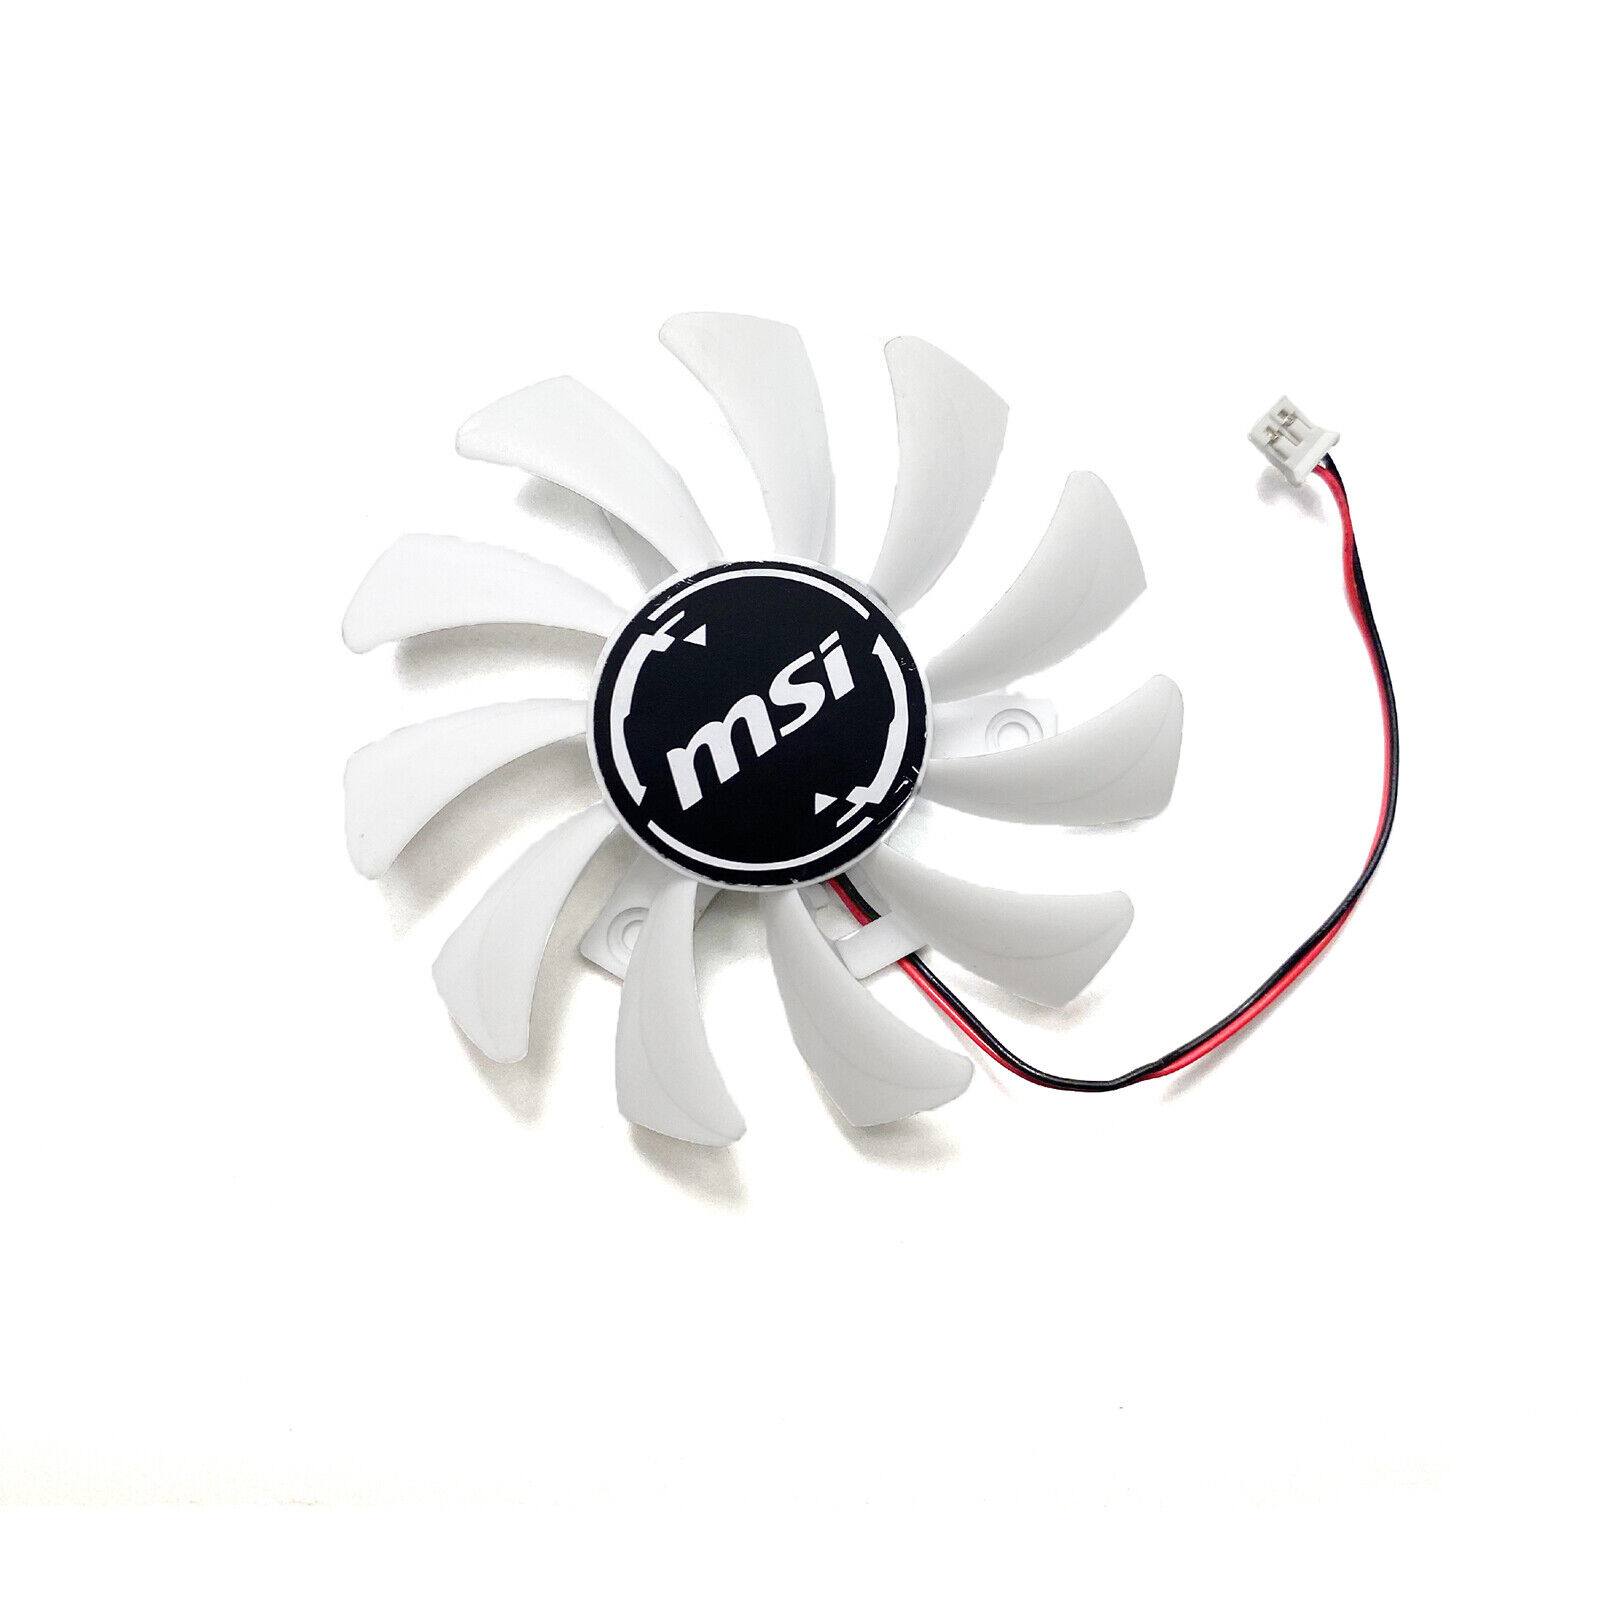 Replacement Graphics Card Cooling Fan for MSI GeForce GT 730 2GB V3